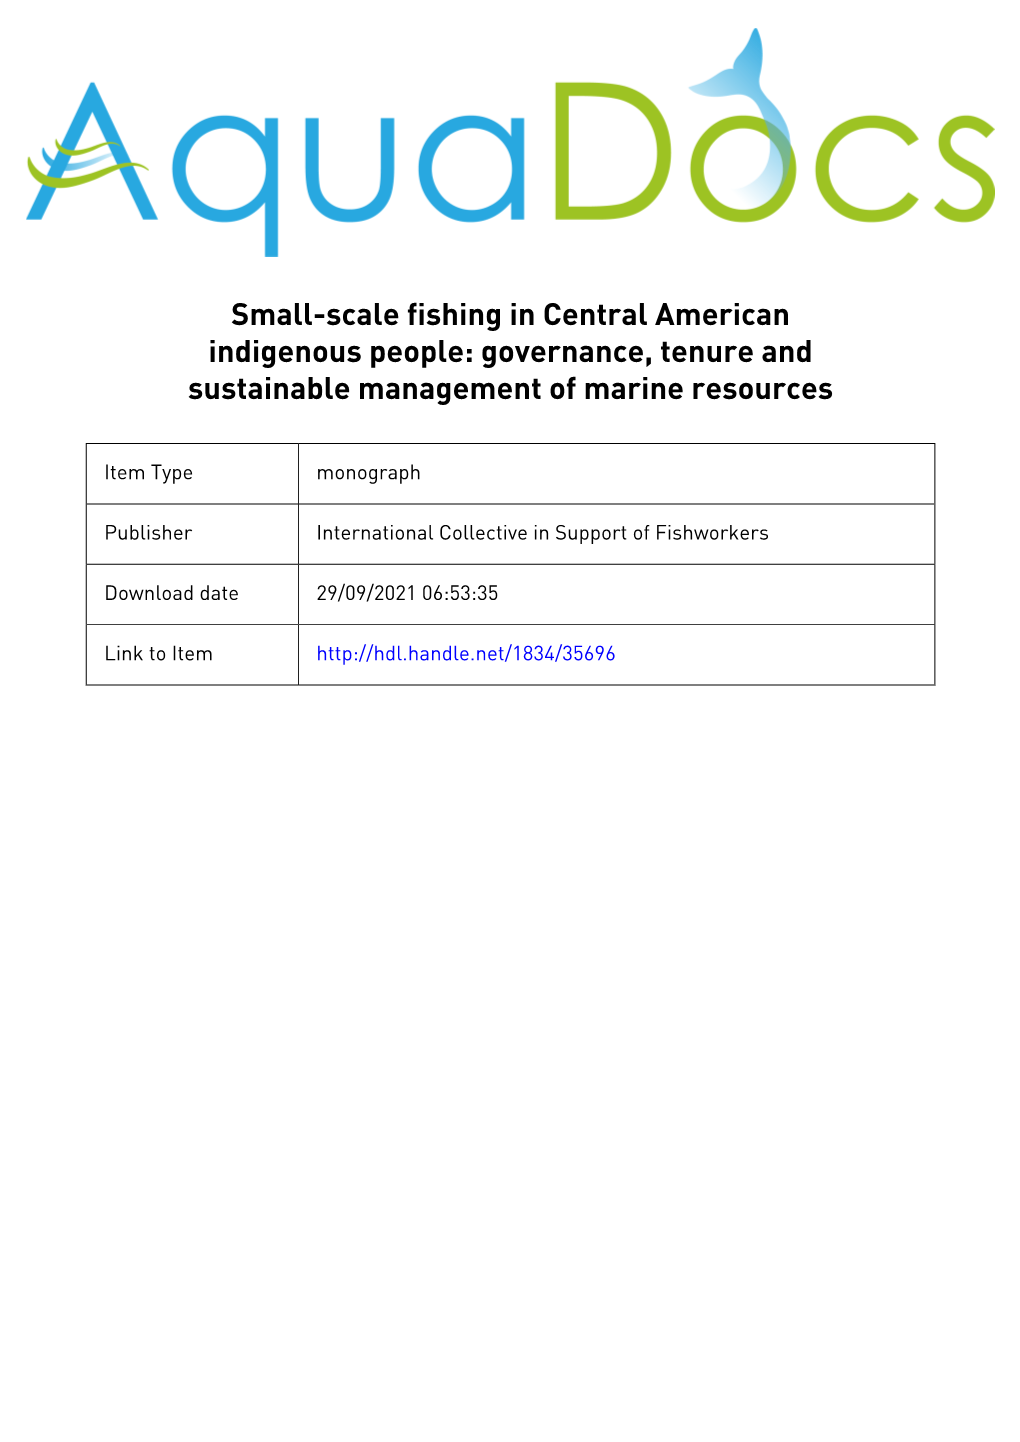 Small-Scale Fishing in Central American Indigenous People: Governance, Tenure and Sustainable Management of Marine Resources